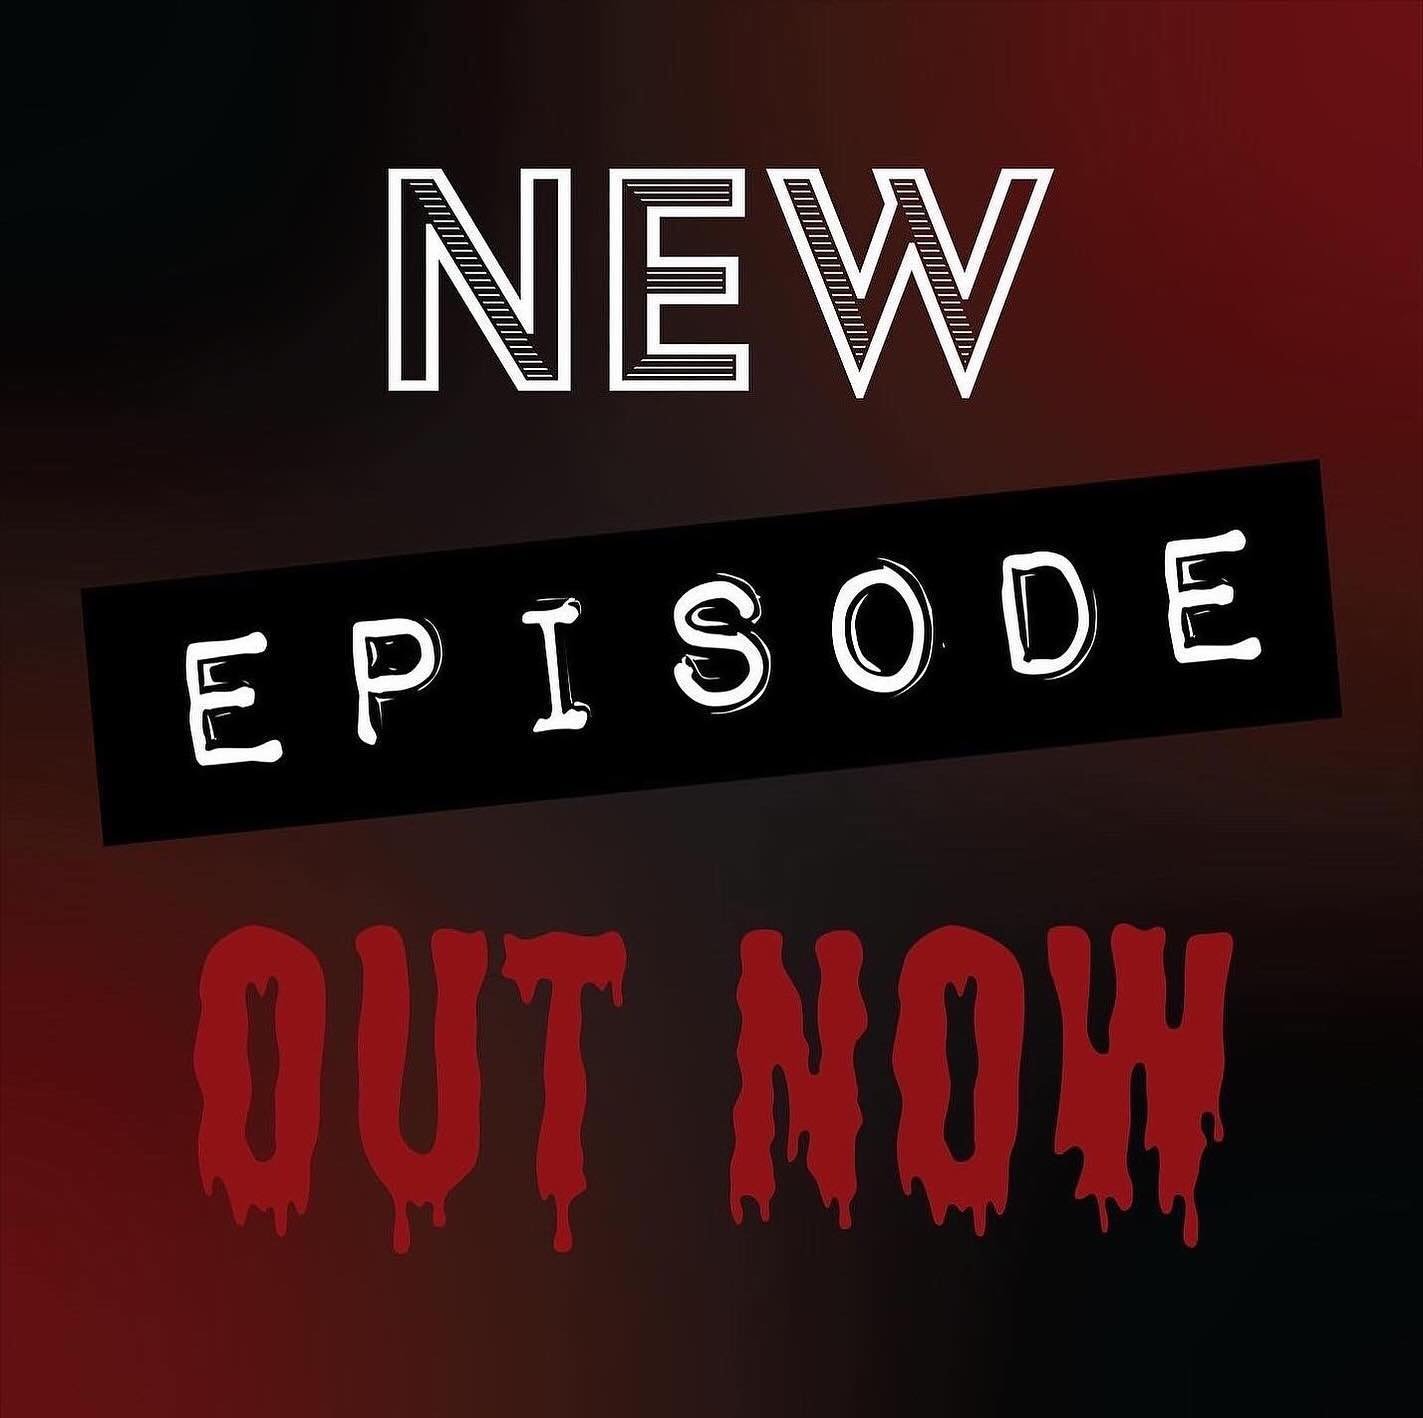 Hey Darlings-we had some technical issues (I&rsquo;m blaming Mercury perpetually being in retrograde) but here&rsquo;s the visuals for the latest episode of @anotherfuckinghorrorpodcast . Out now!
_____________________________________________

Episod